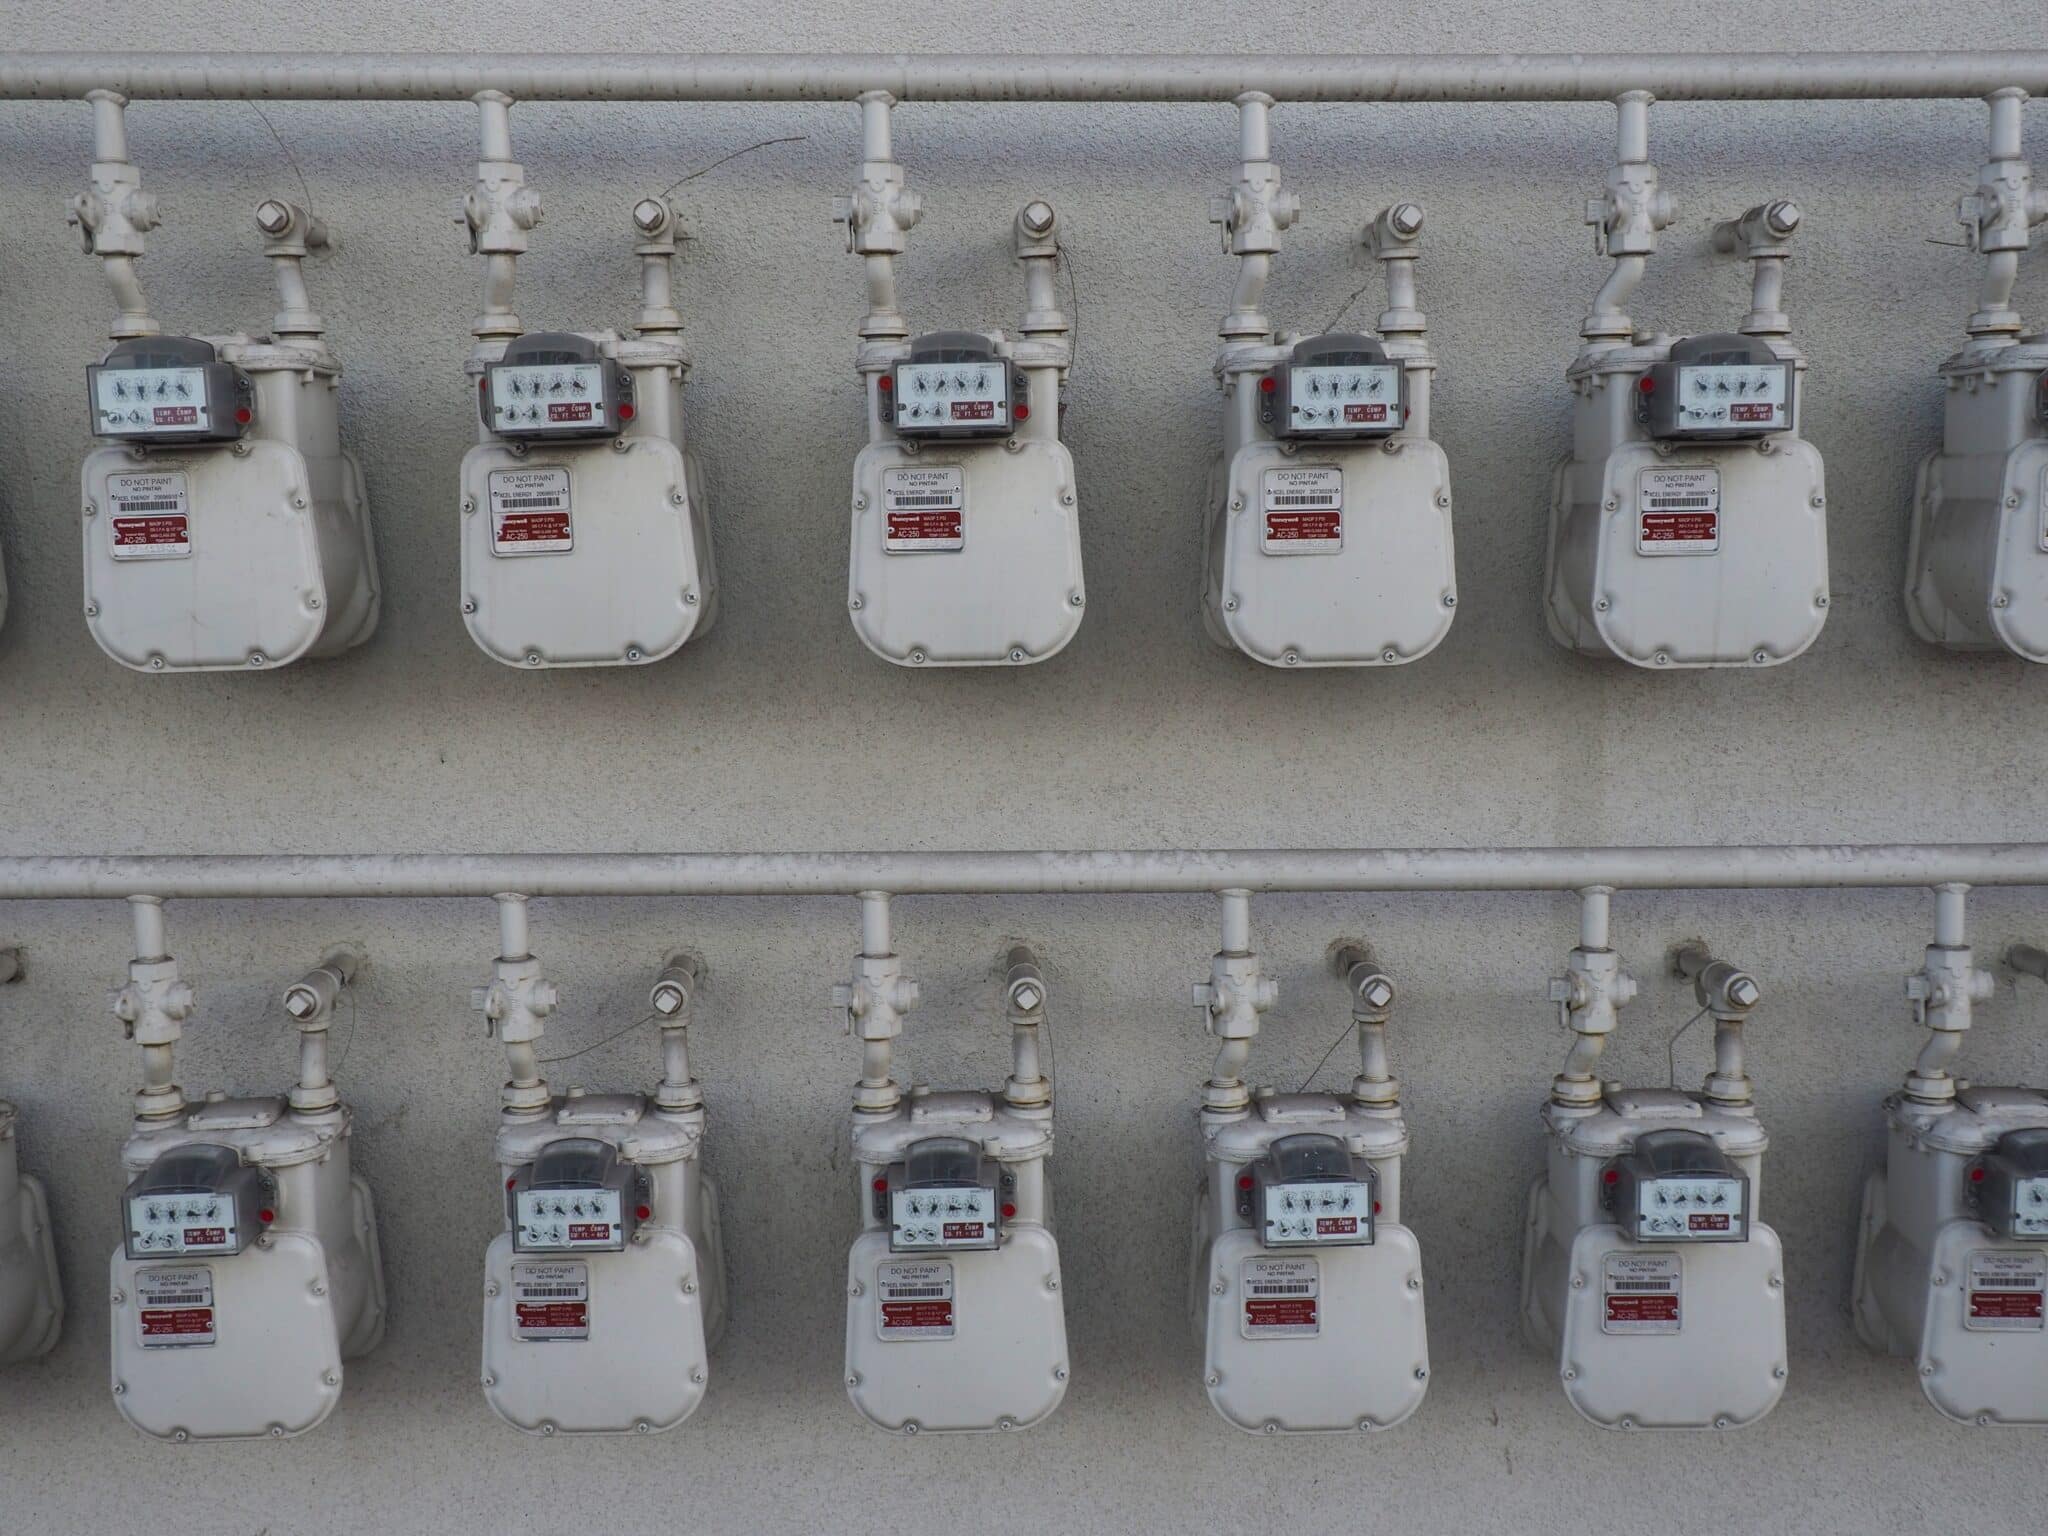 Electric meters scaled